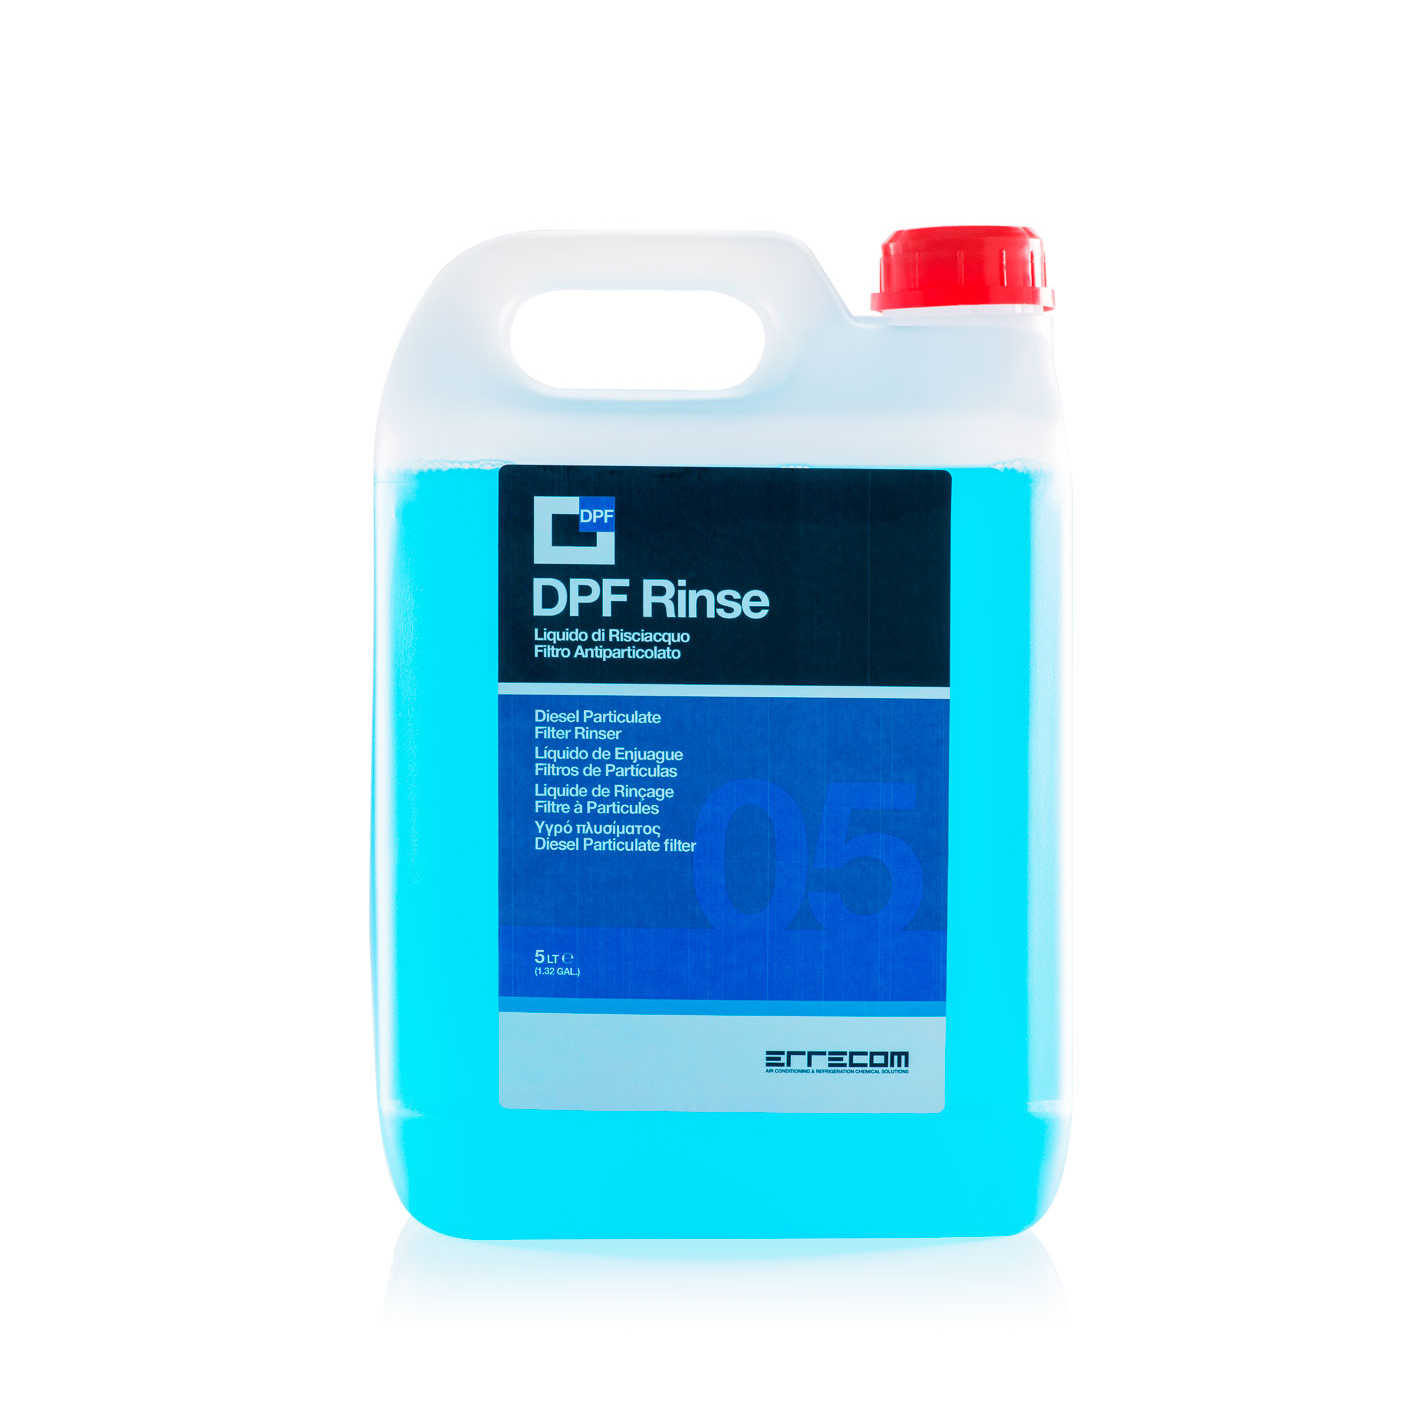 2 x DPF RINSE - Liquid for the Rinsing of Diesel Particulate Filters - 5 liters - Package # 2 pcs.